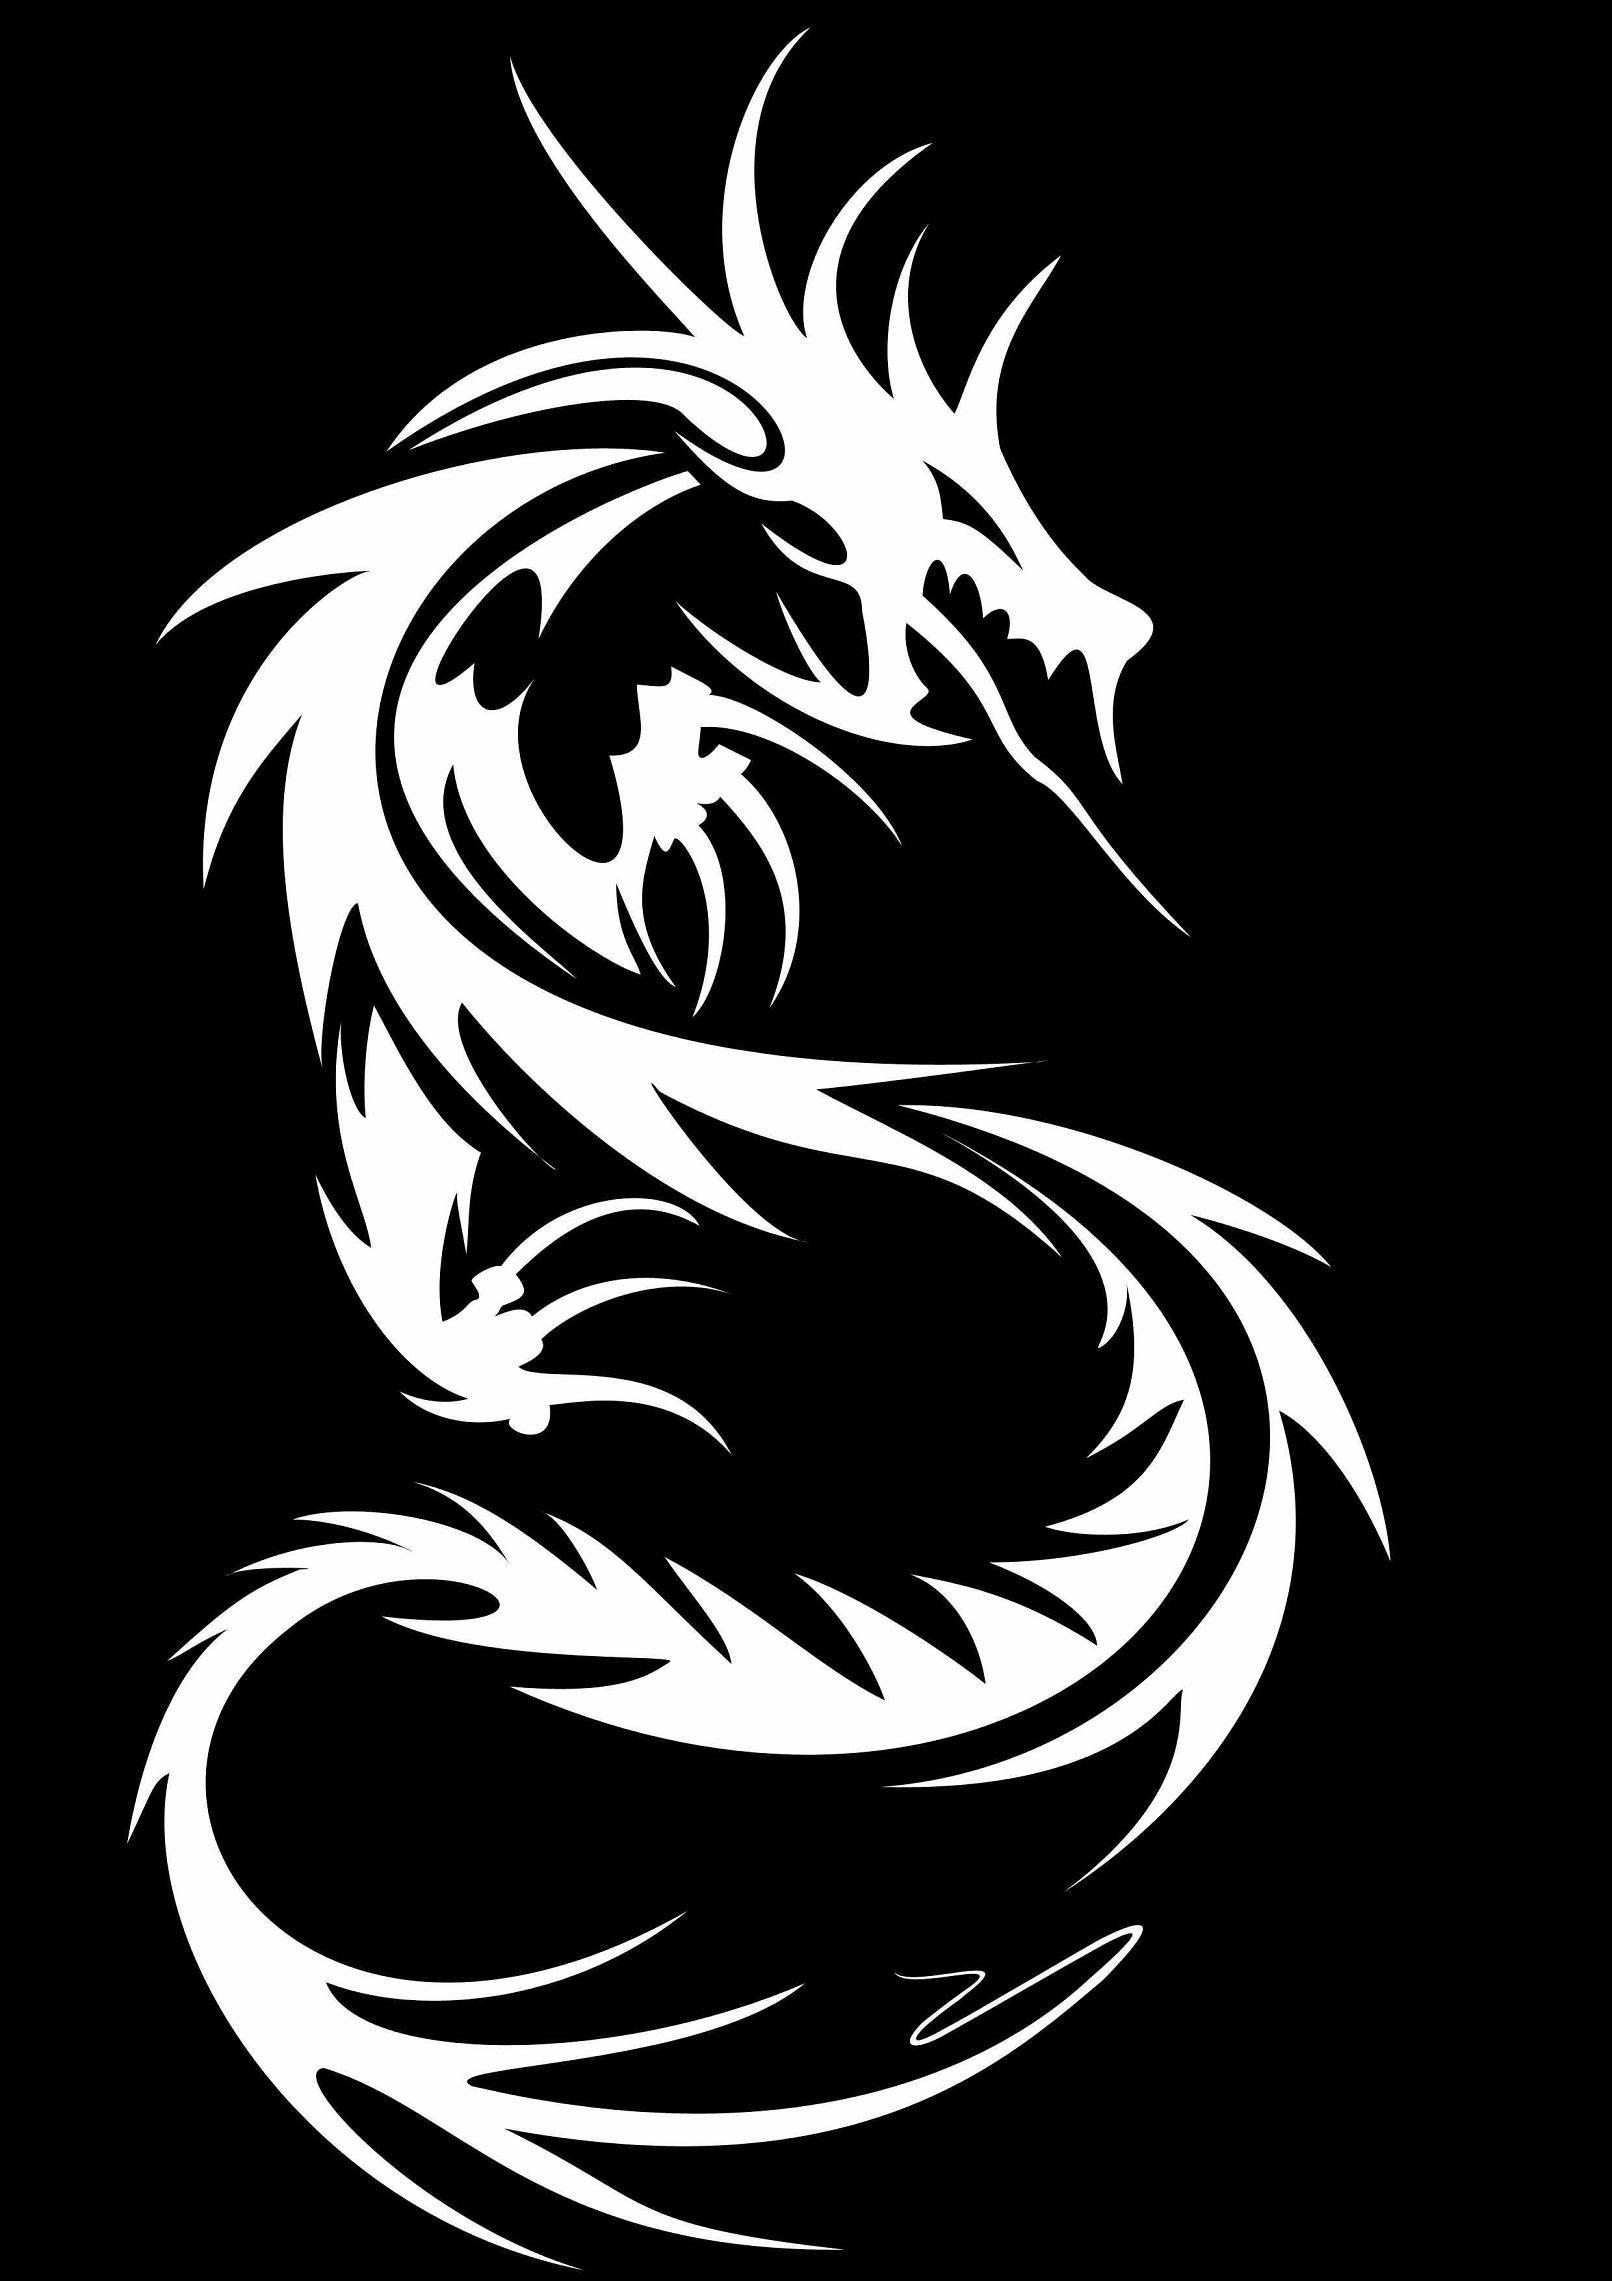 Black and White Dragon Wallpapers - Top Free Black and White Dragon